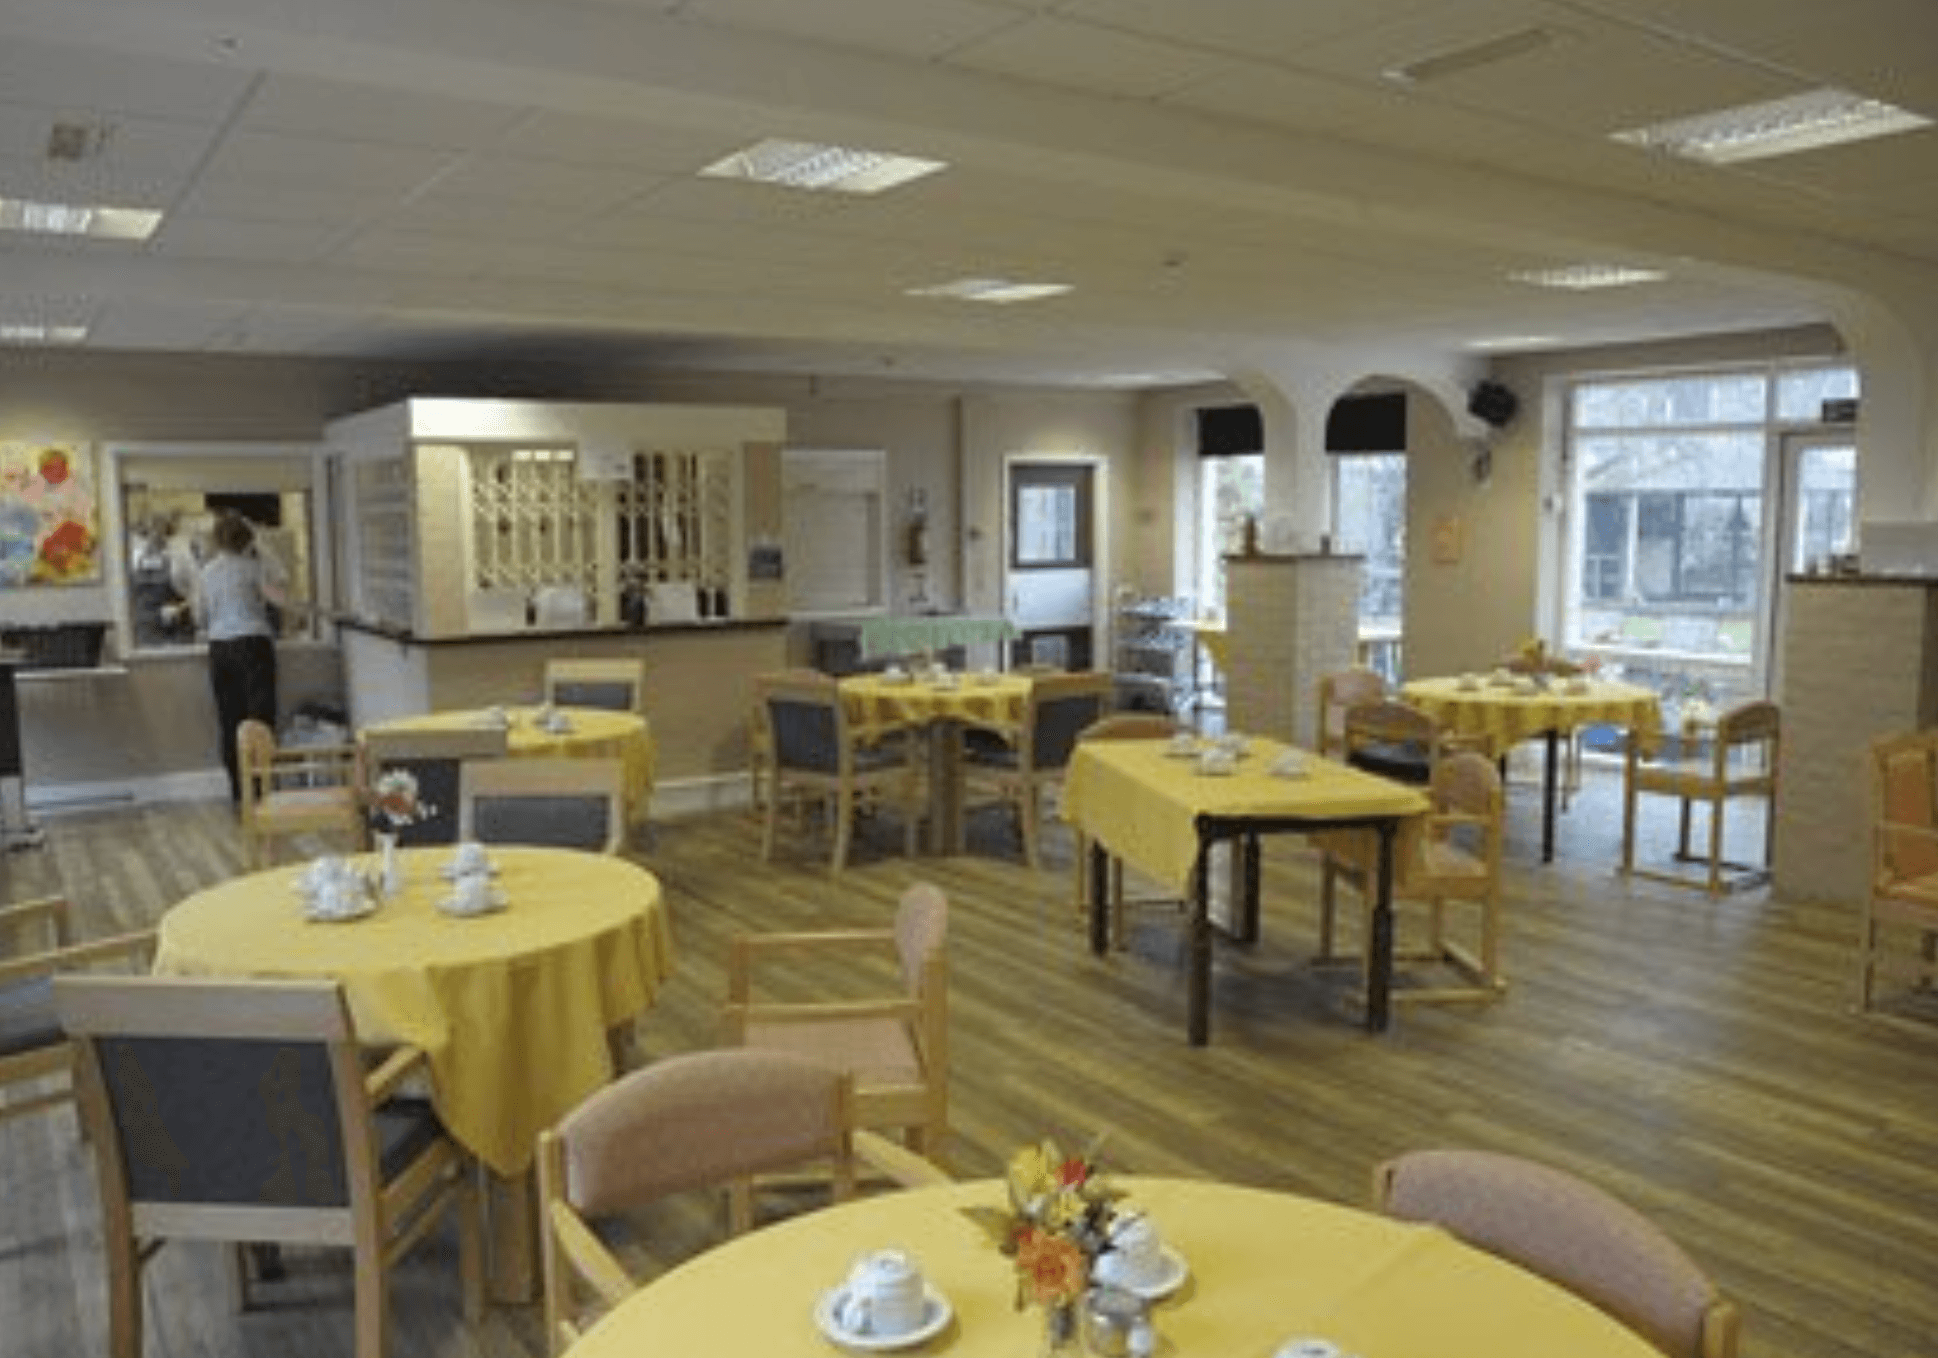 Dining area of Harvey House care home in Leicester